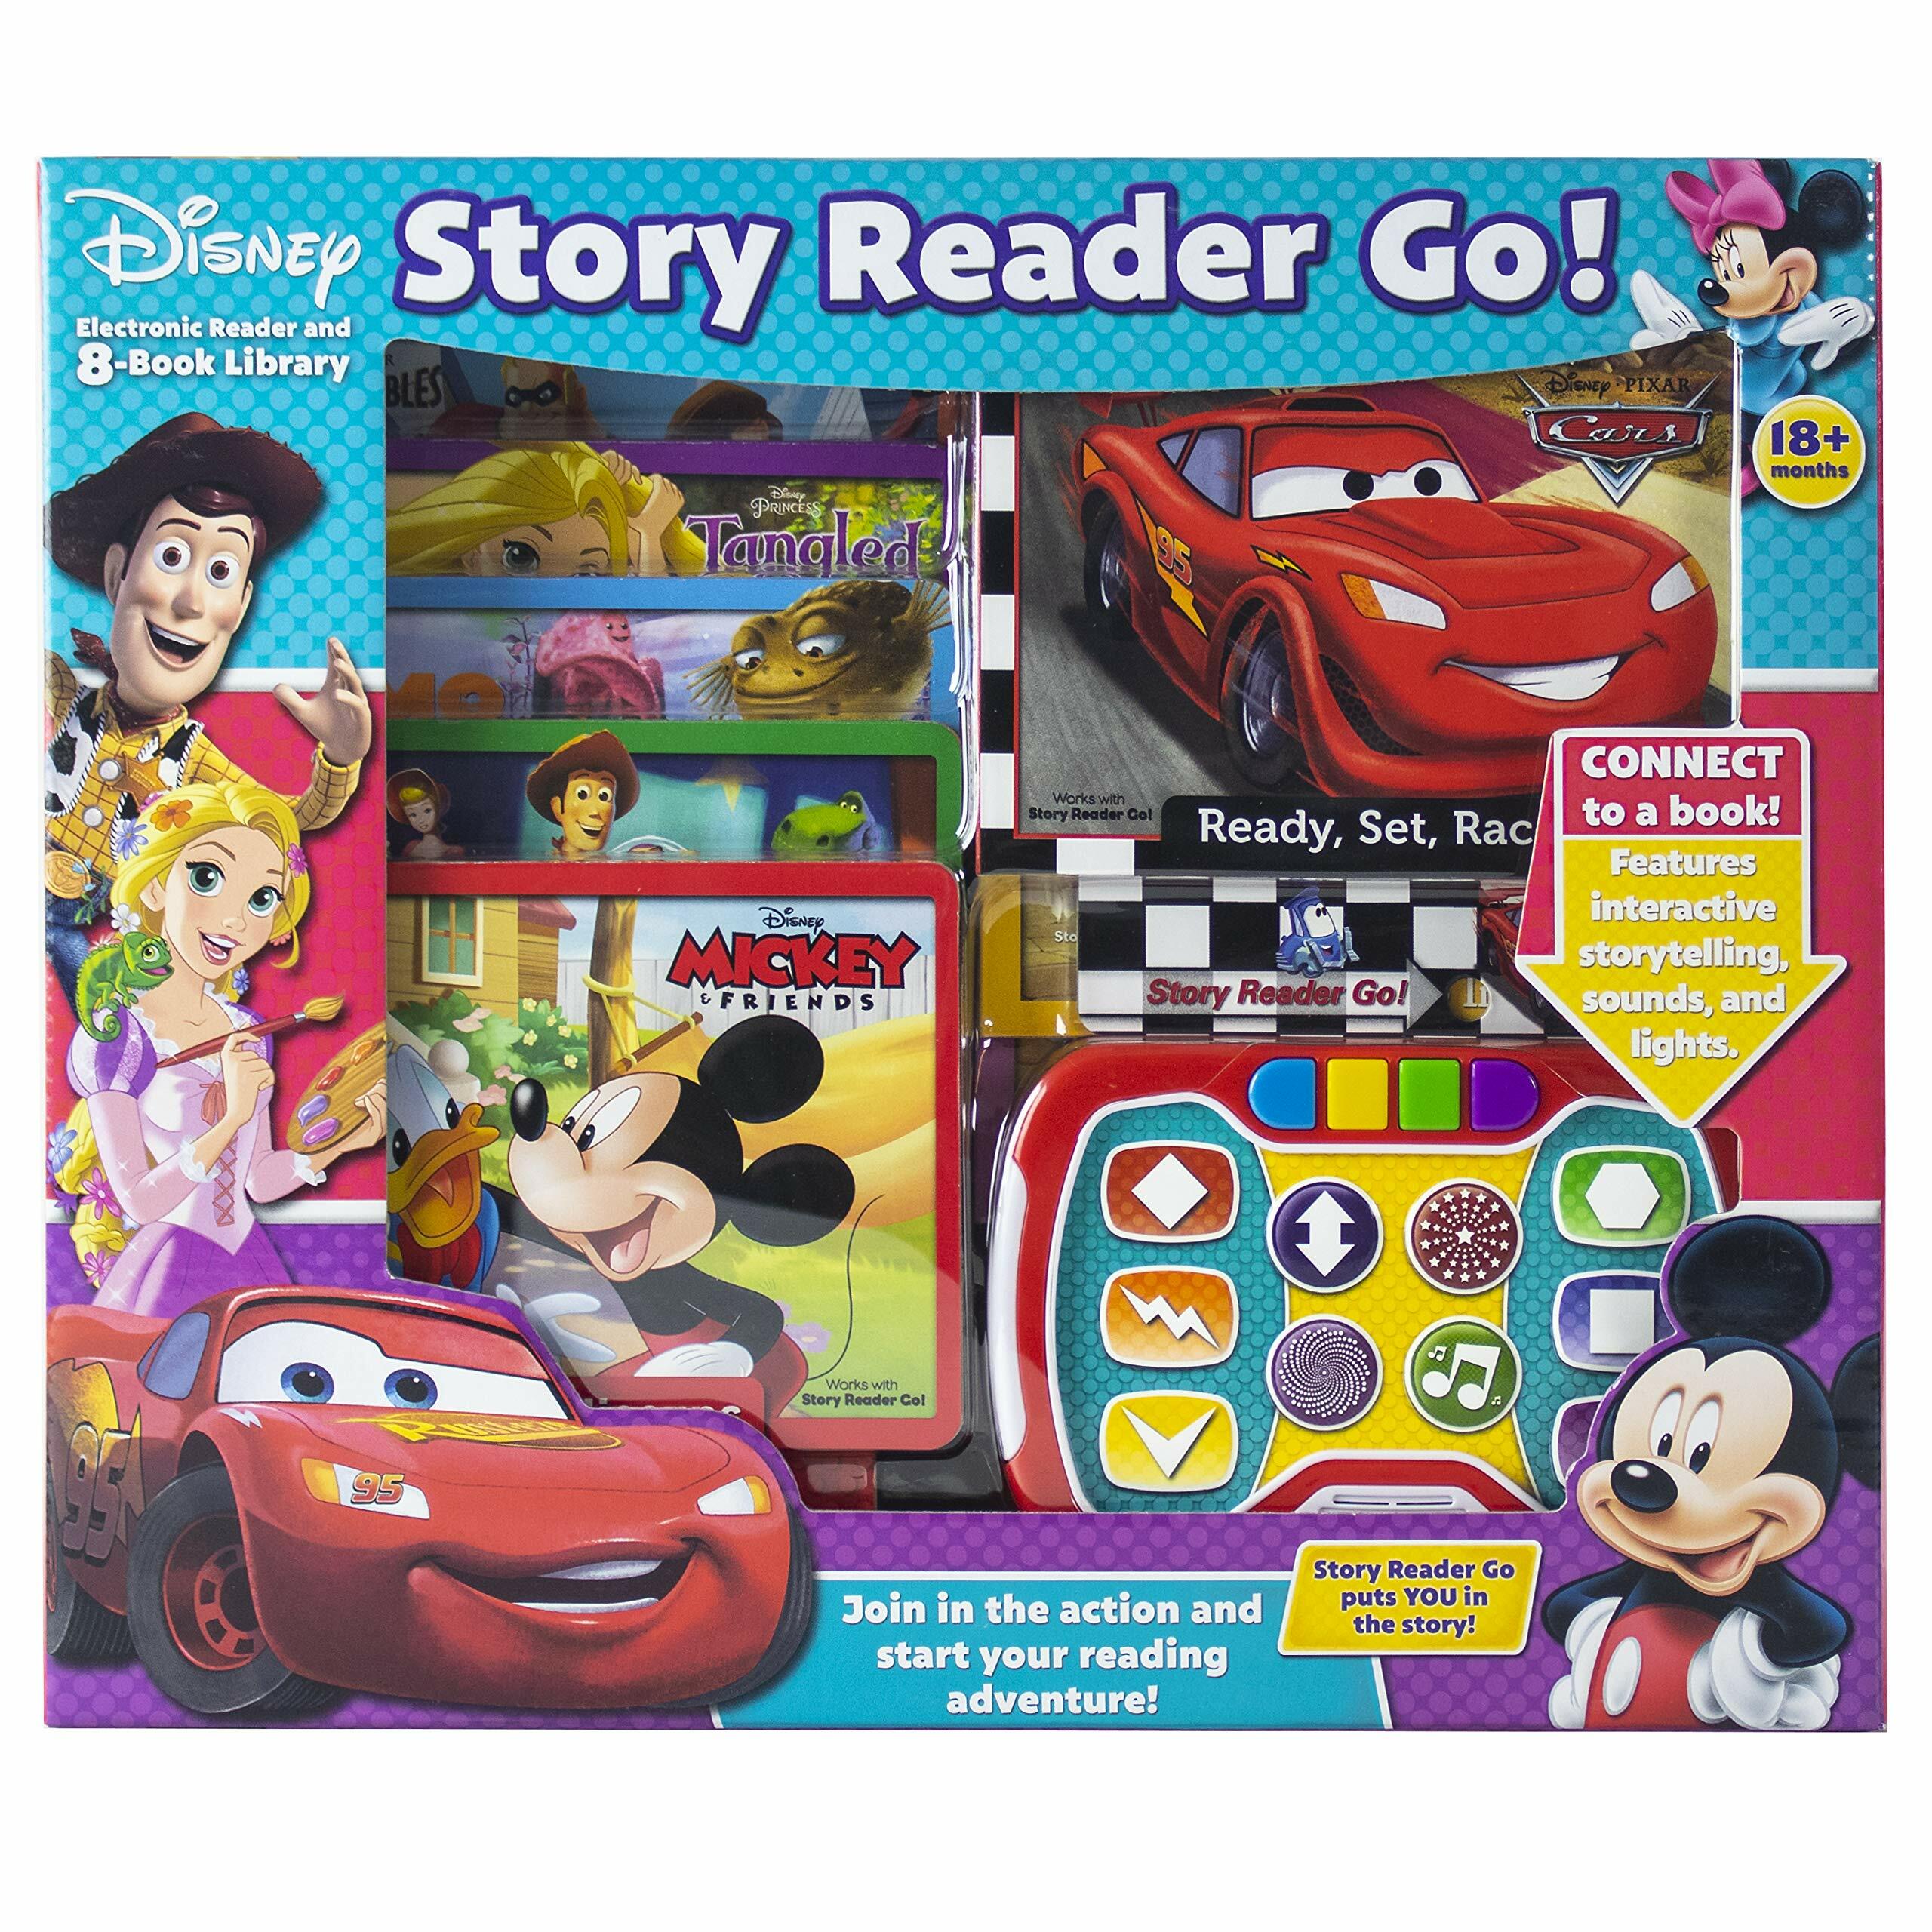 Disney Story Reader Go! Electronic Reader and 8-Book Library (Sound Book)